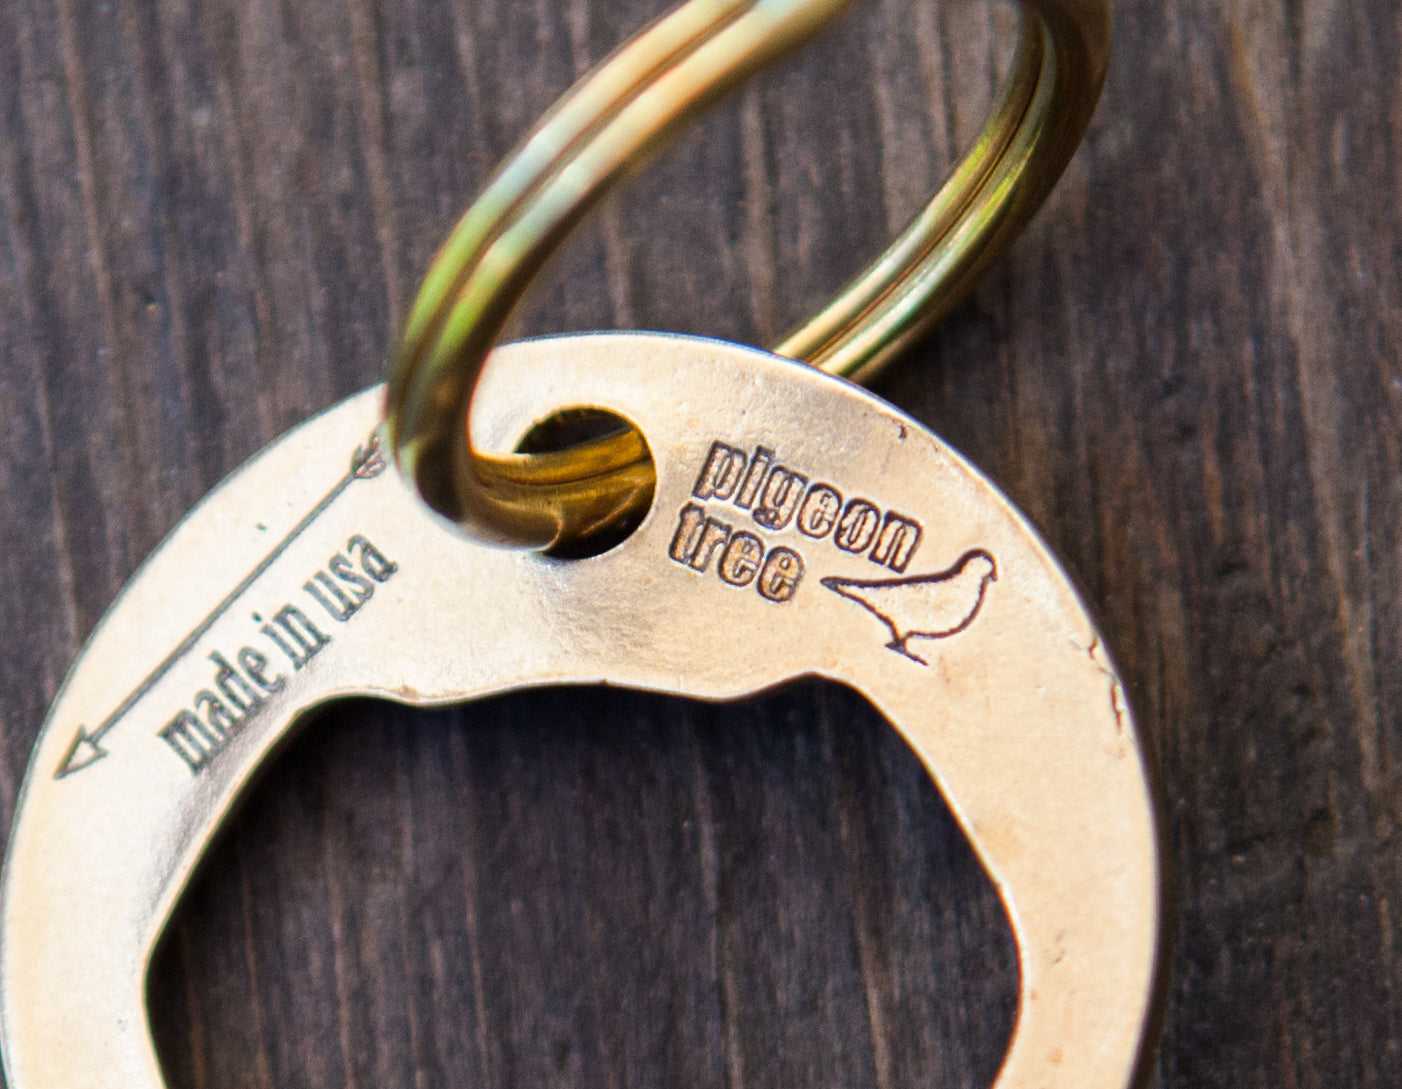 Recycled Brass Bottle Opener Keychain Version 2.0 - Cast in Los Angeles